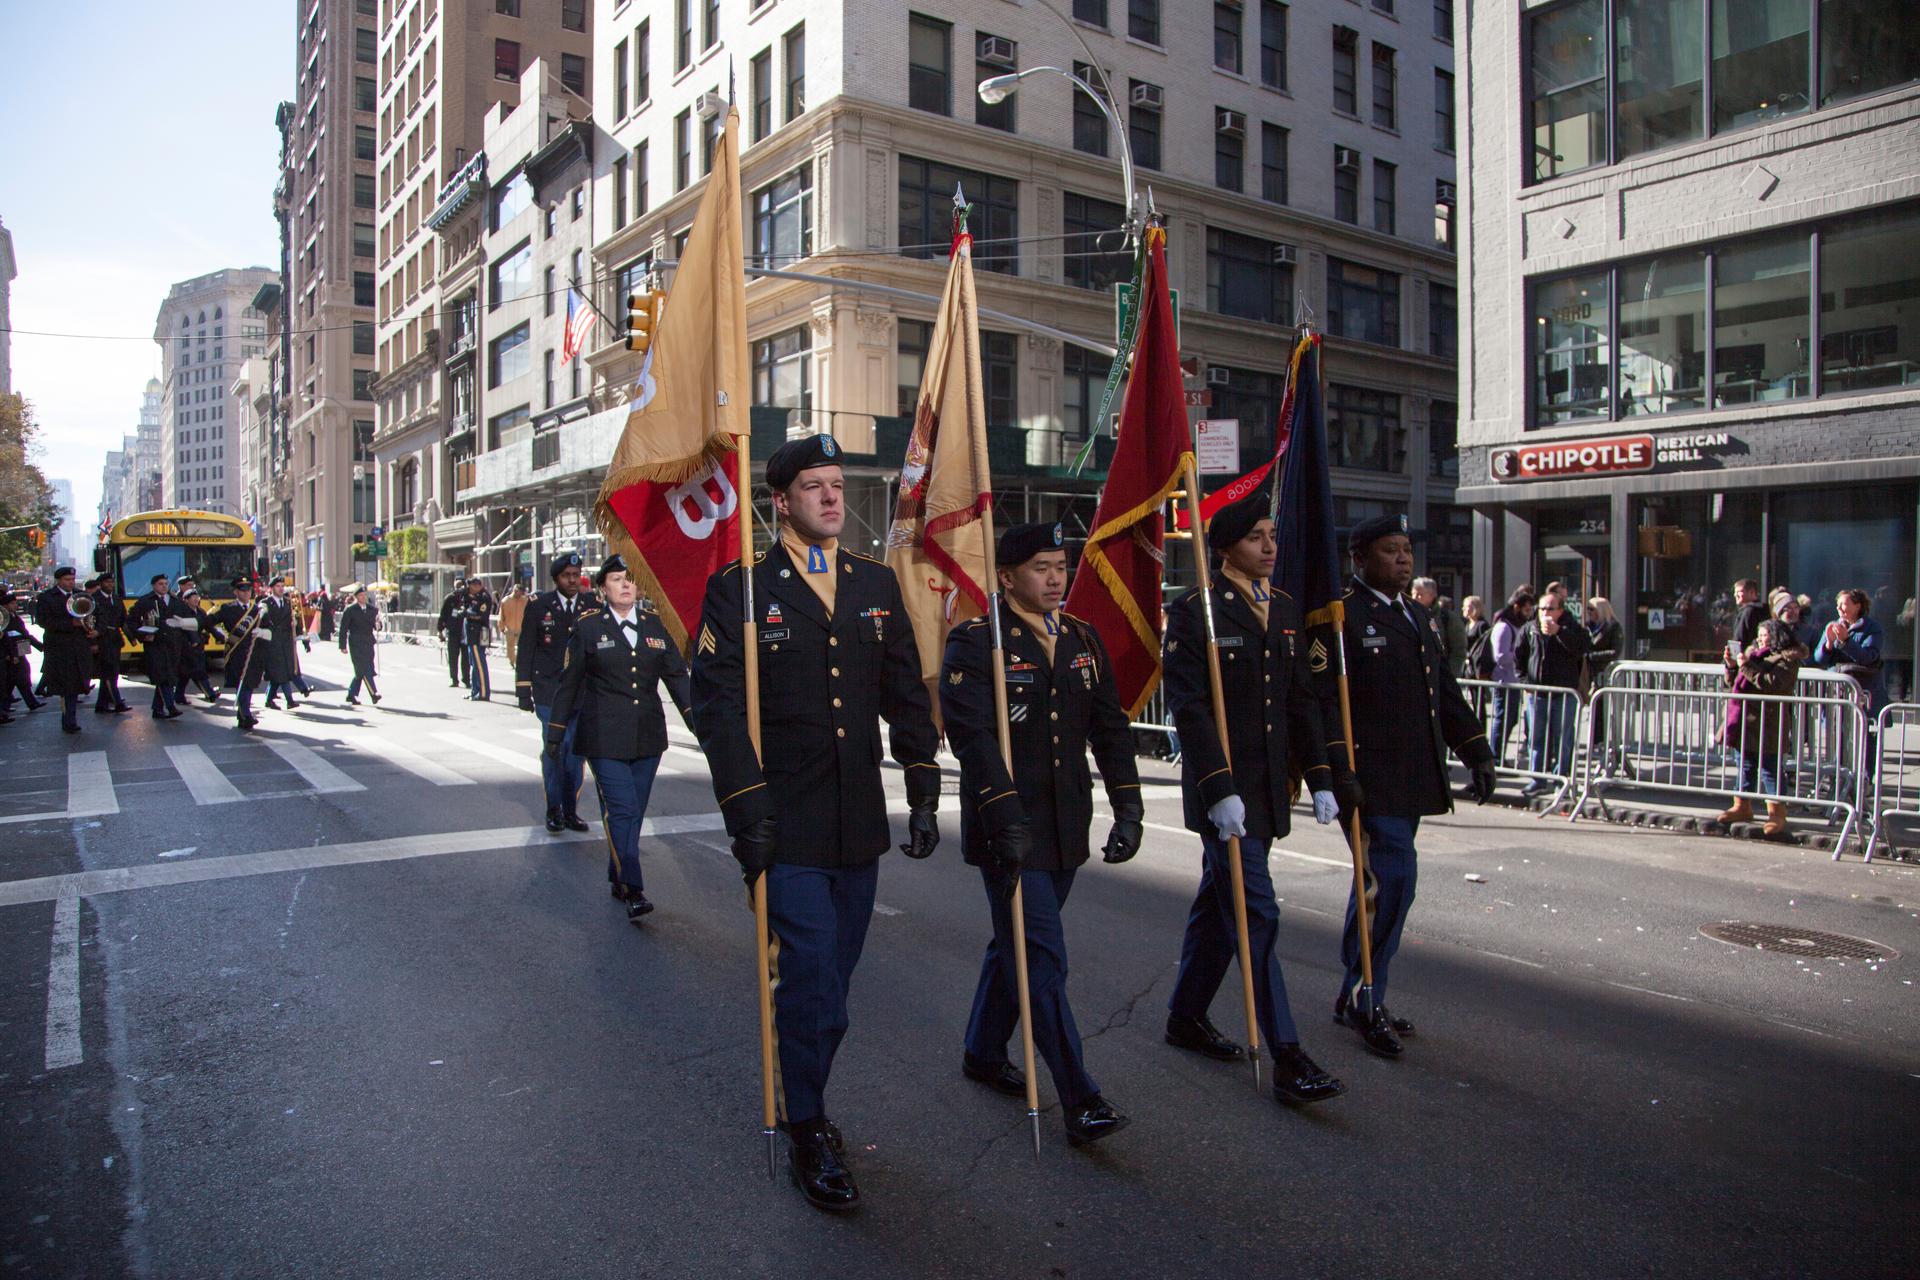 US Army Reserve color guard soldiers carry the colors on Fifth Avenue during the annual New York City Veterans Day Parade in New York, Nov. 11, 2017.